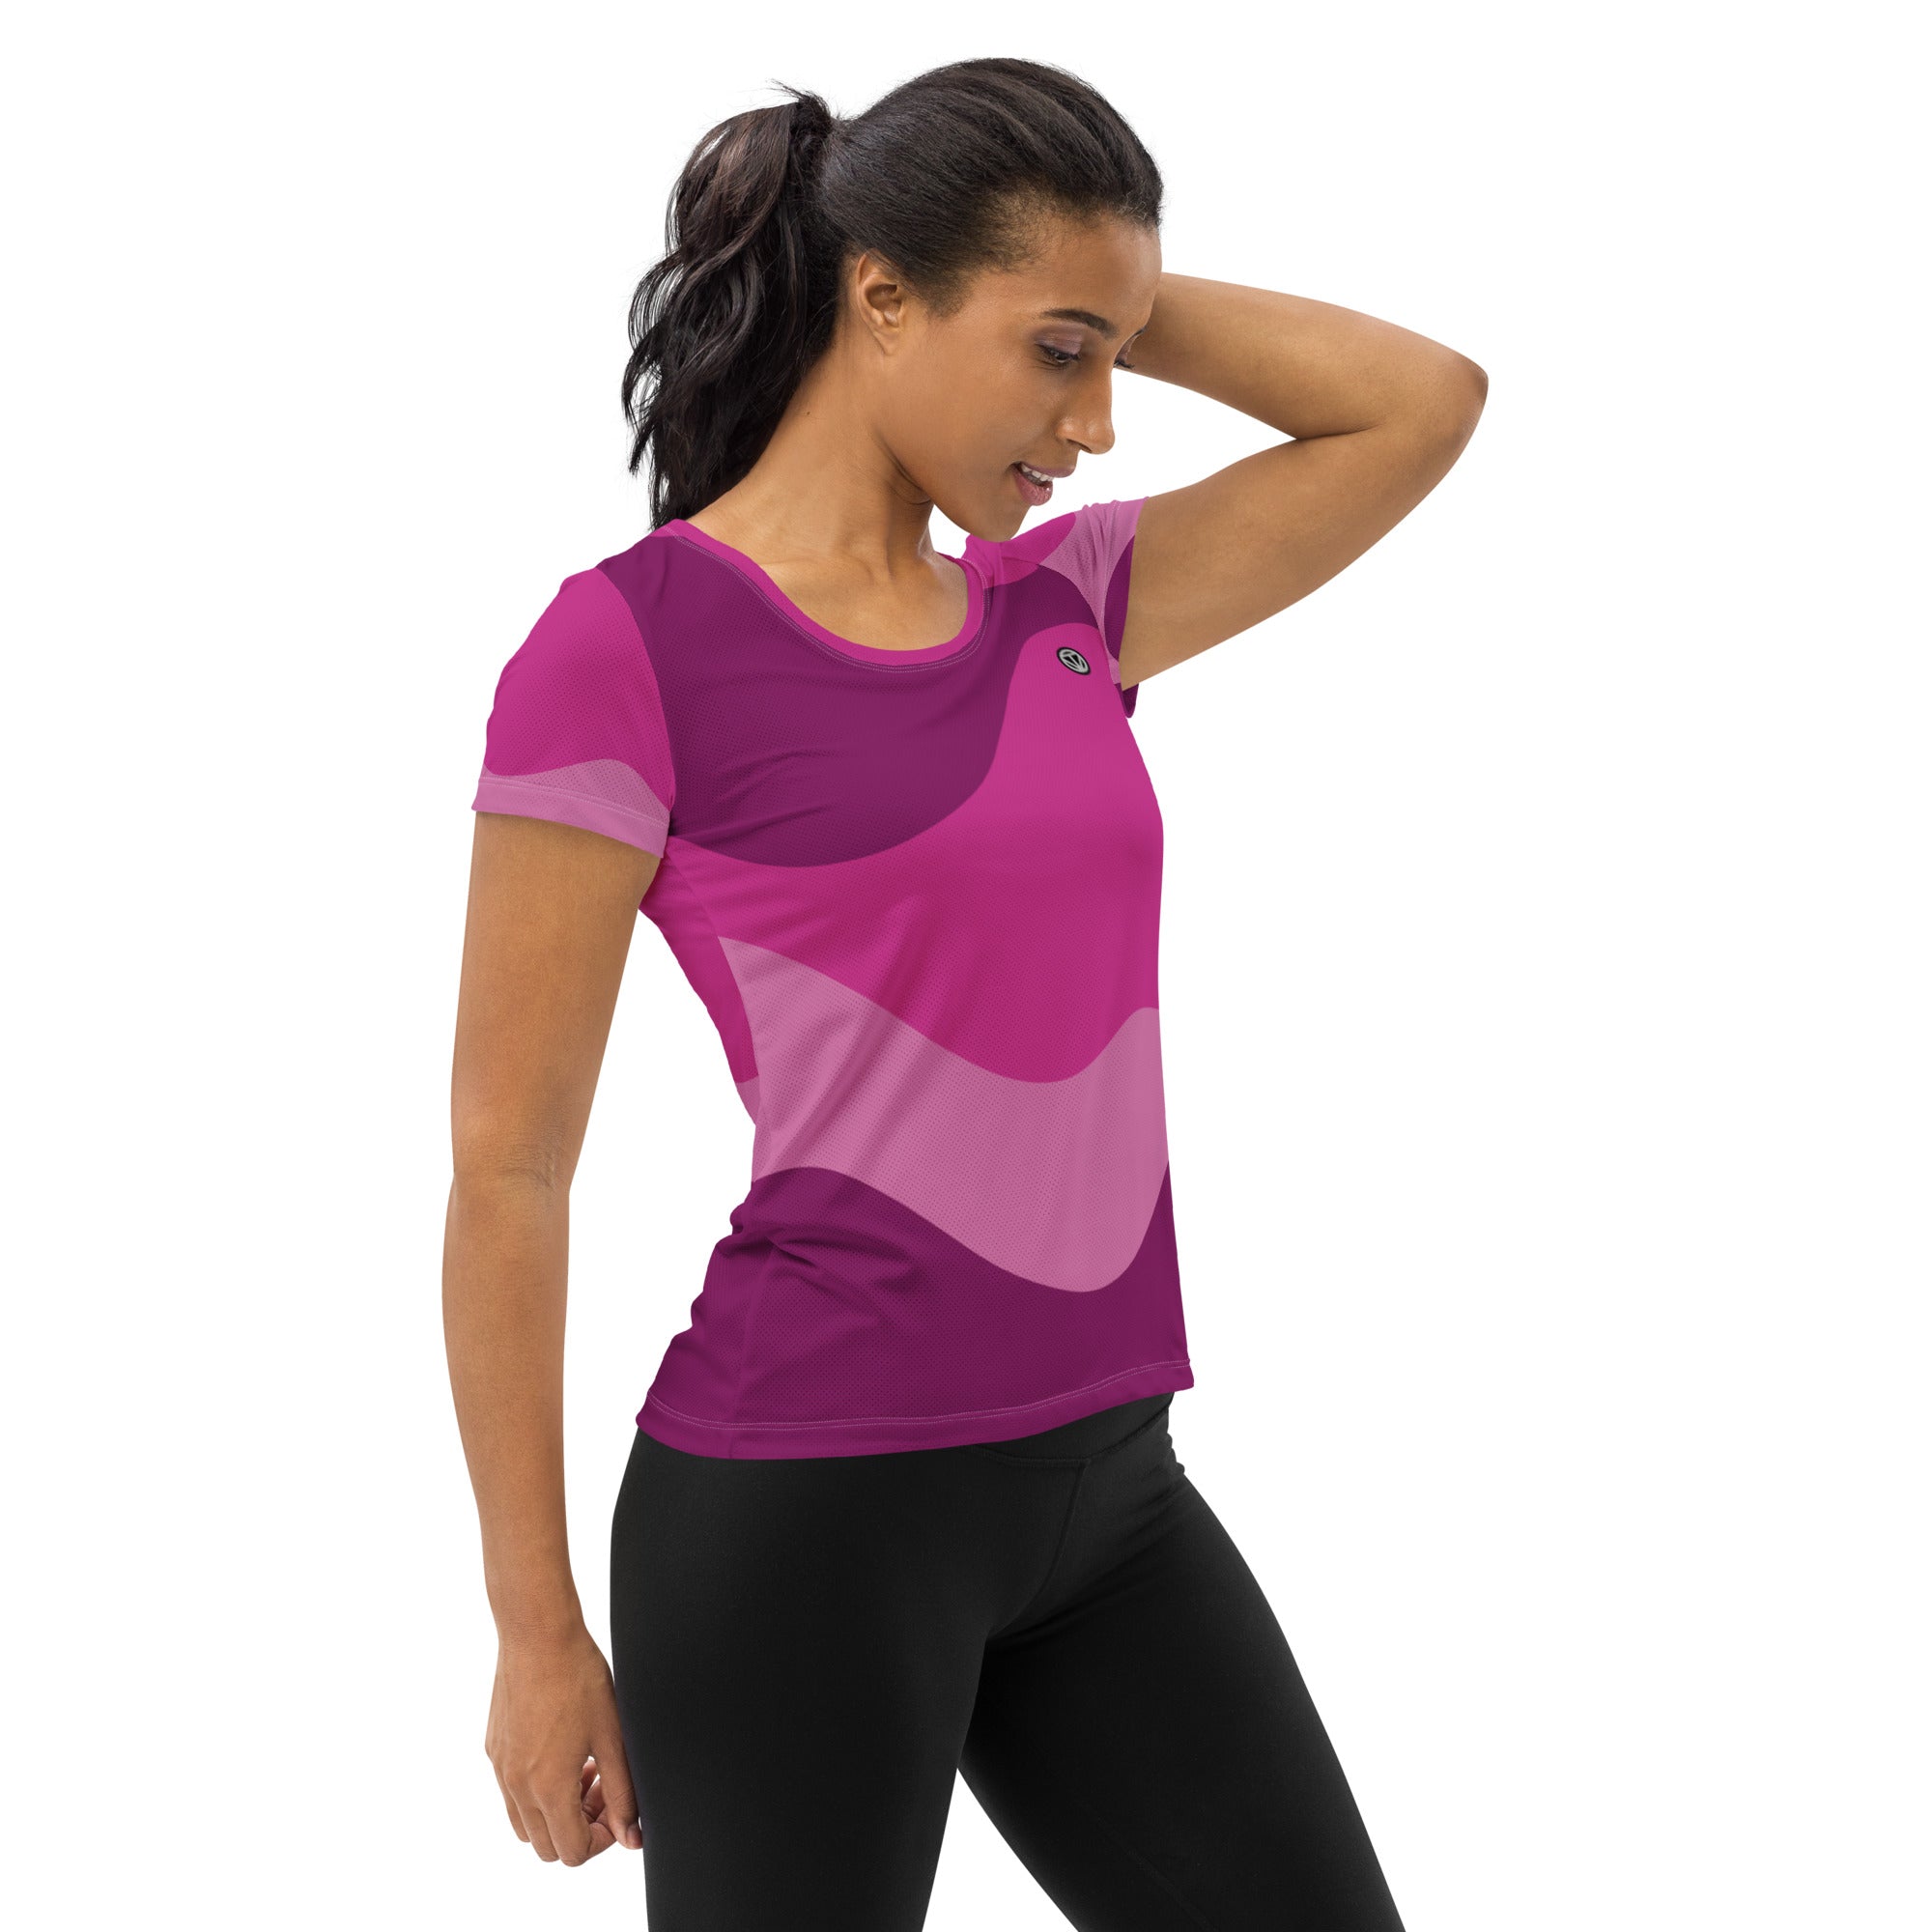 TIME OF VIBES TOV Damen Sport T-Shirt ABSTRACT (Pink) - €45,00